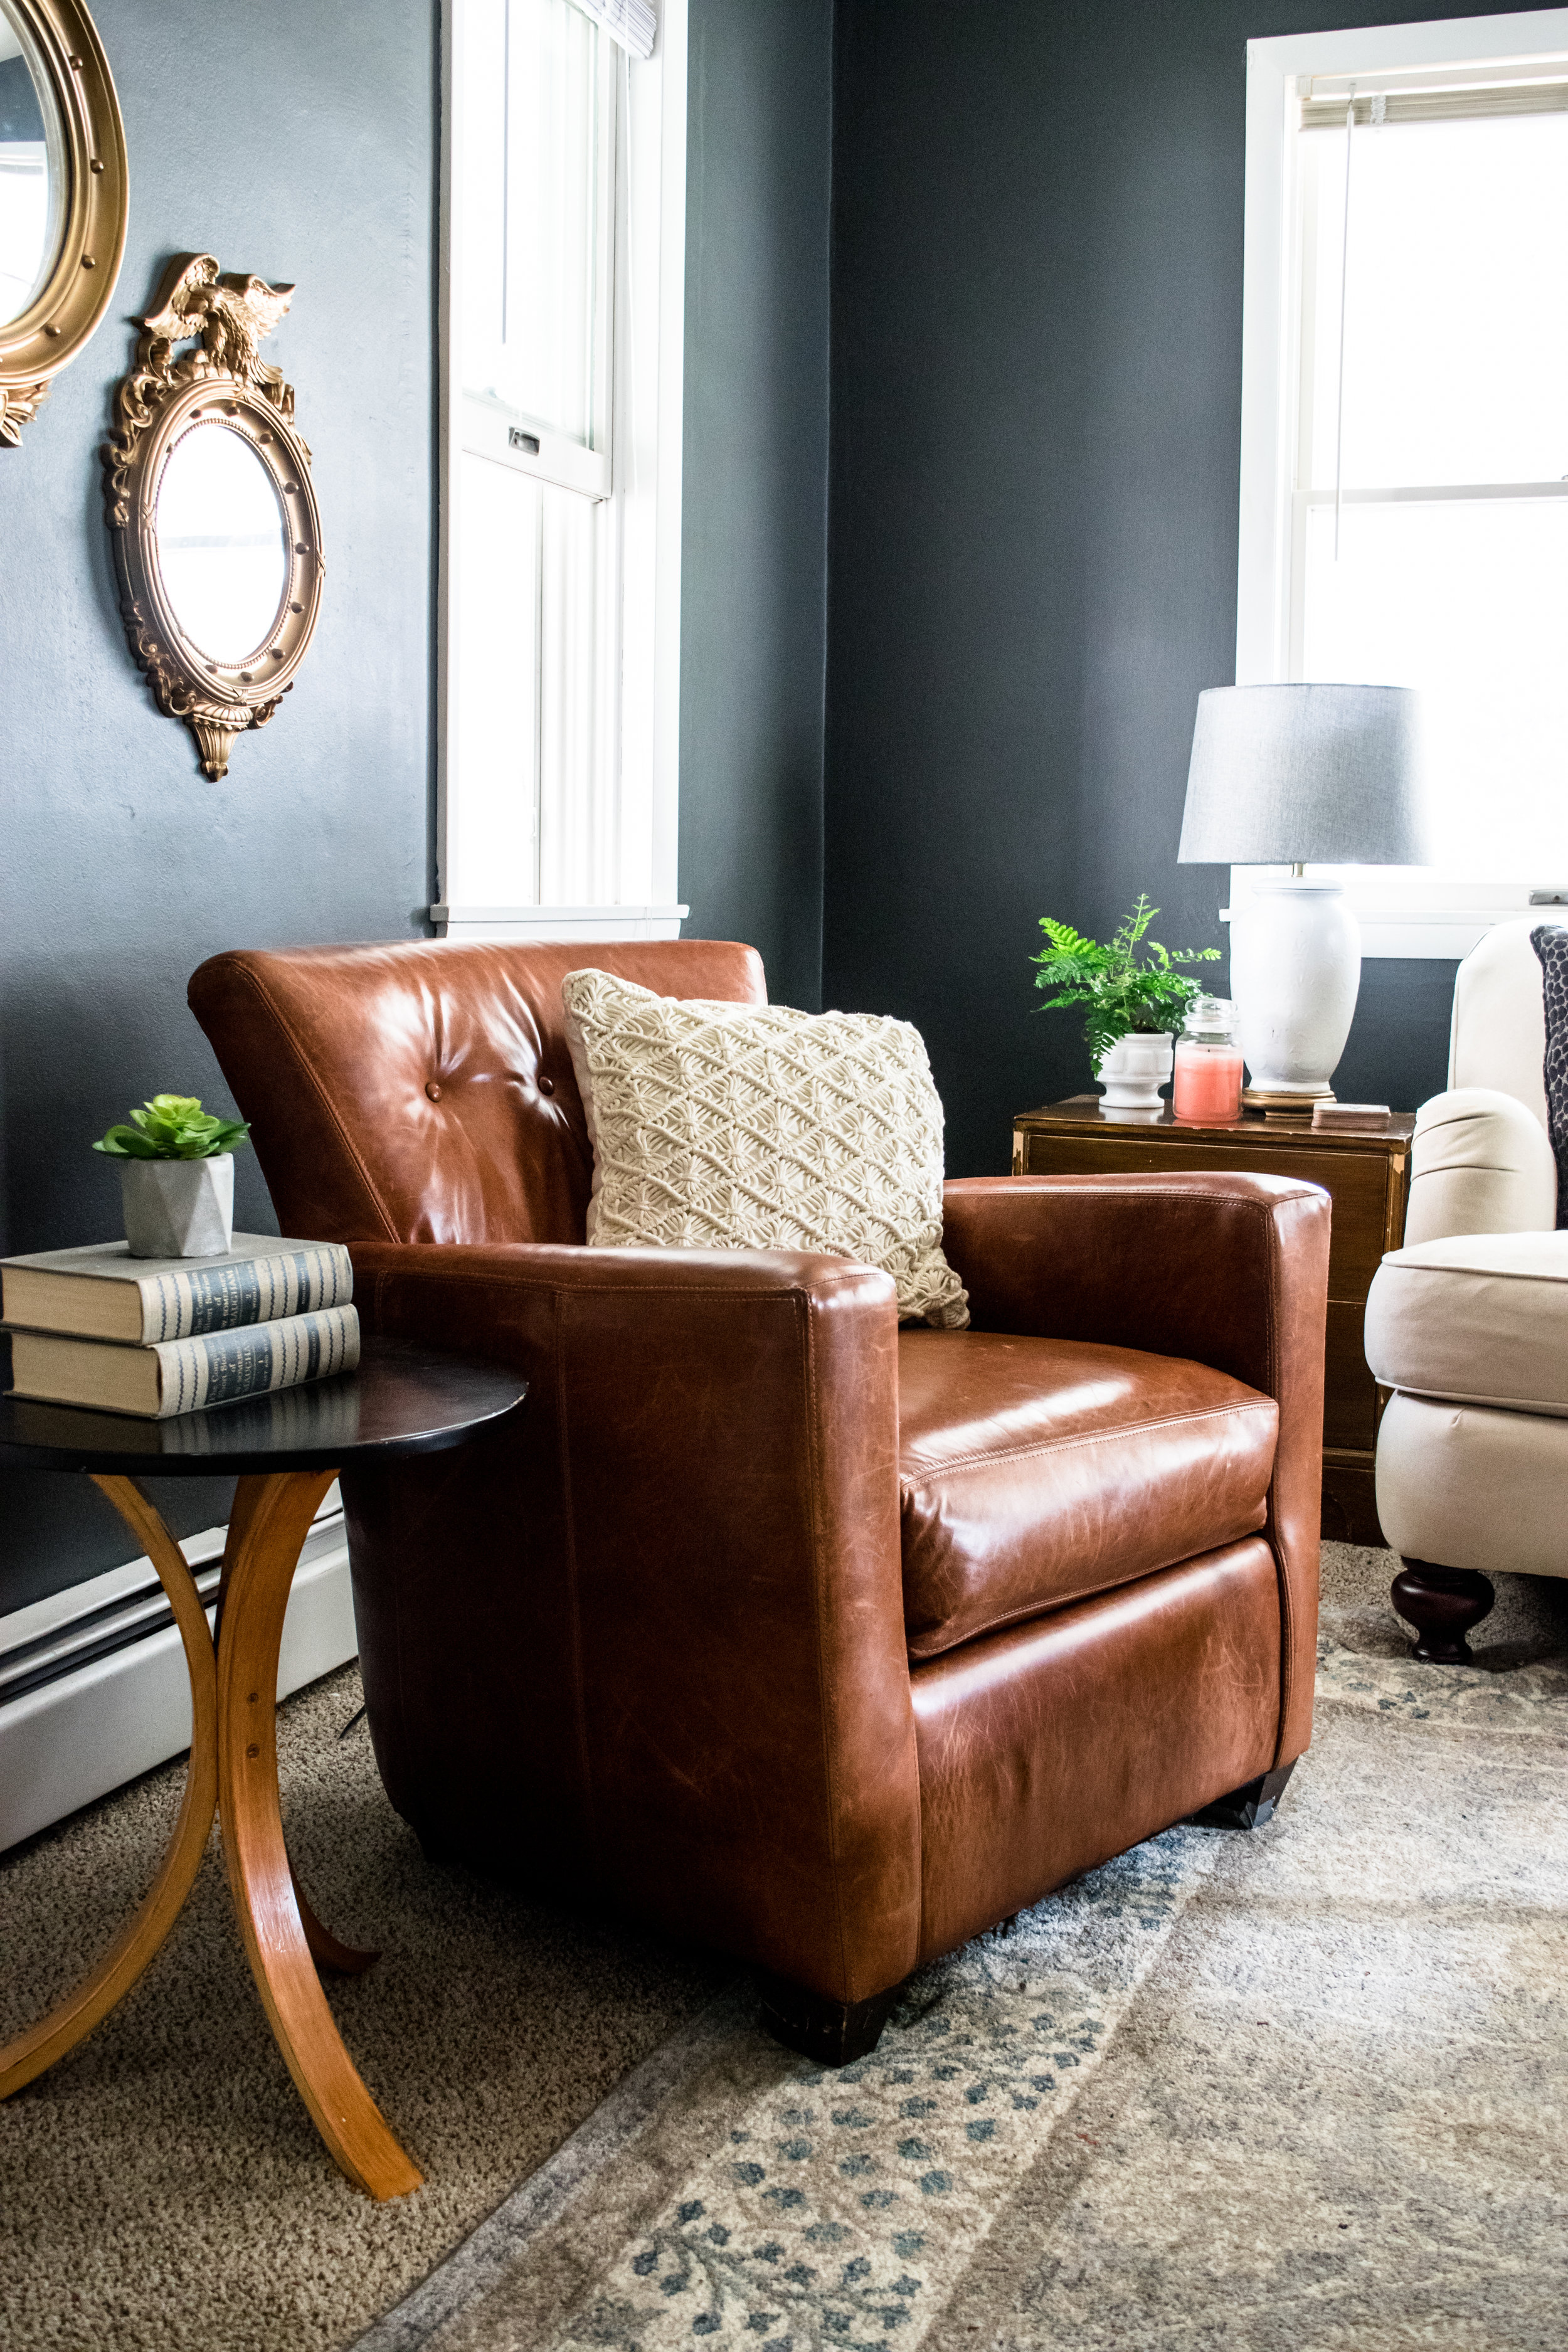 How To Shop For Thrifted Secondhand Furniture Stevie Storck